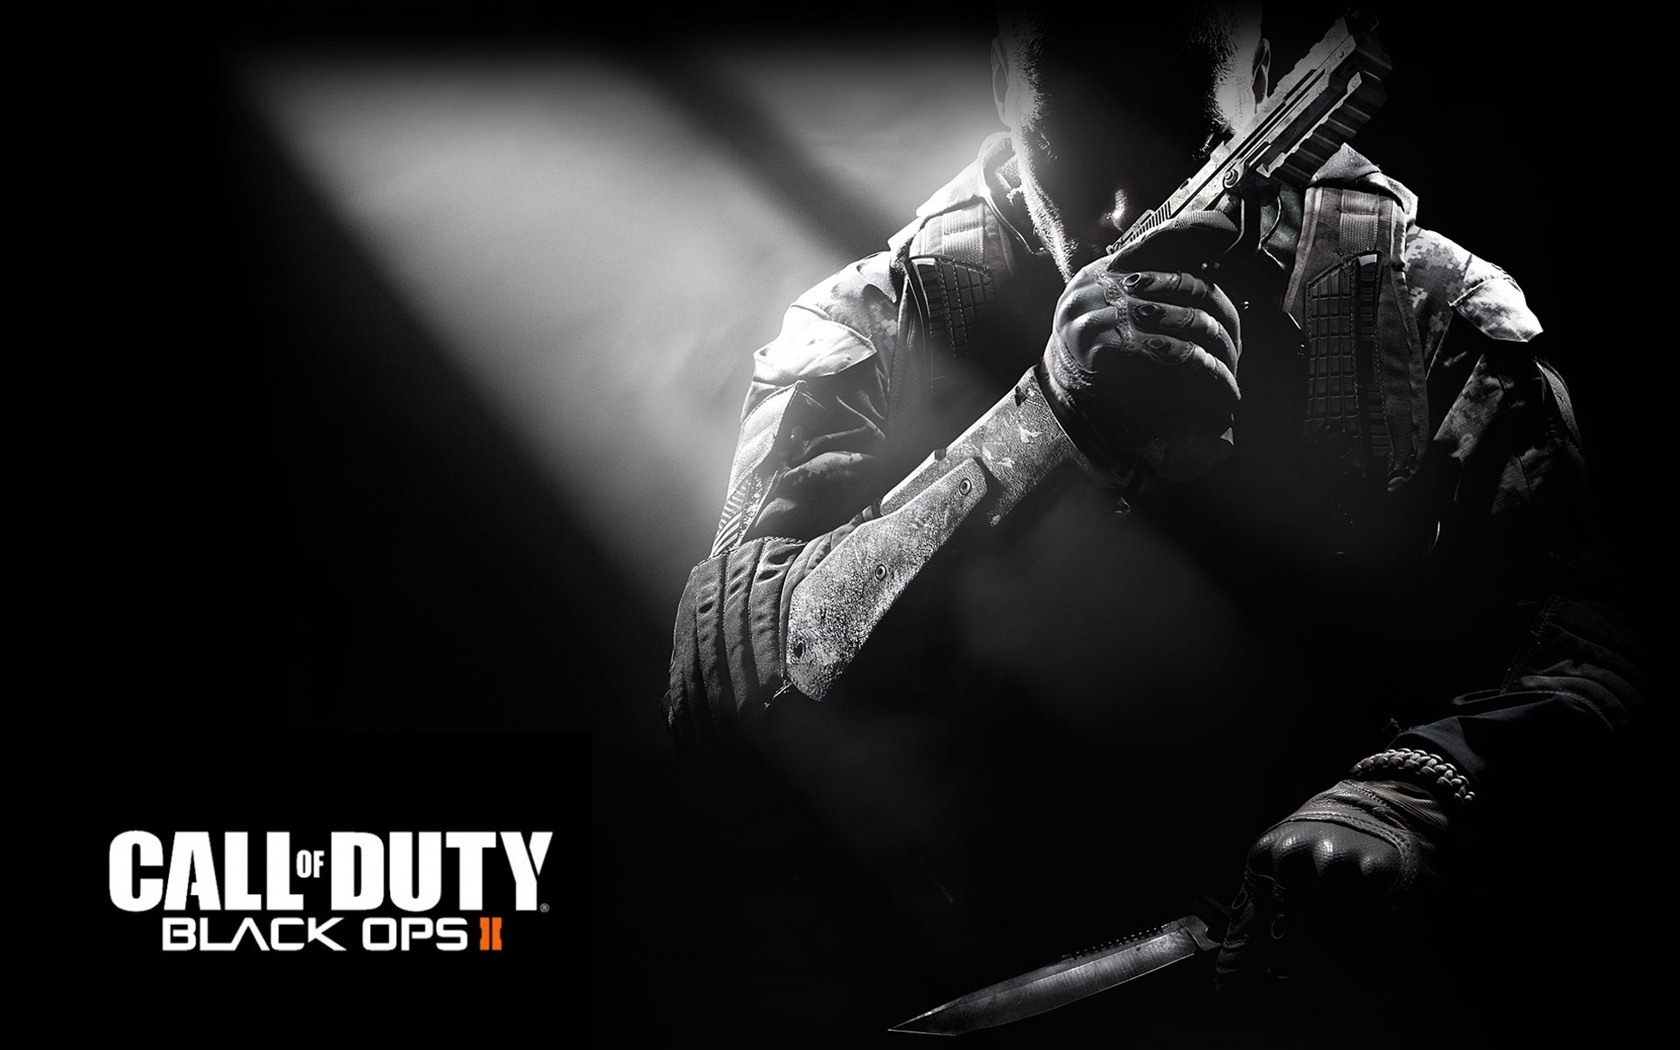 Call of Duty: Black Ops 2 HD wallpapers #11 - 1680x1050